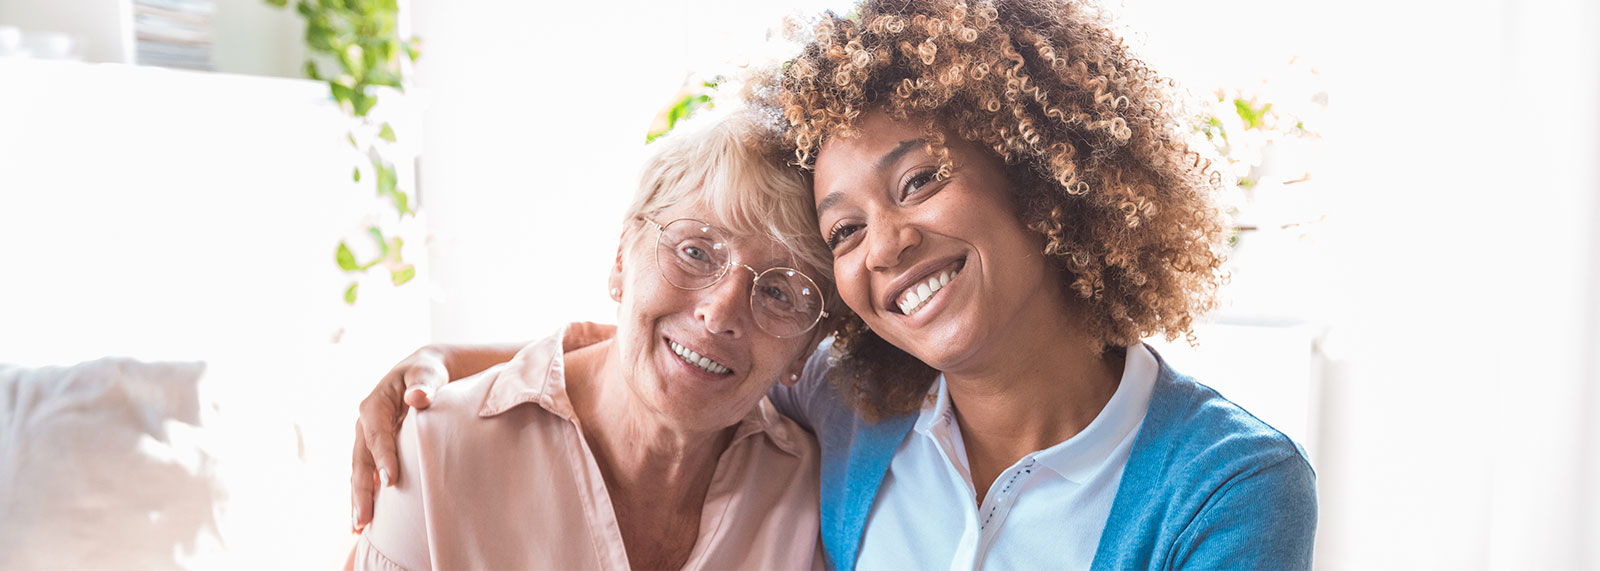 caregiver with her arm around a senior woman's shoulders smiling for the camera